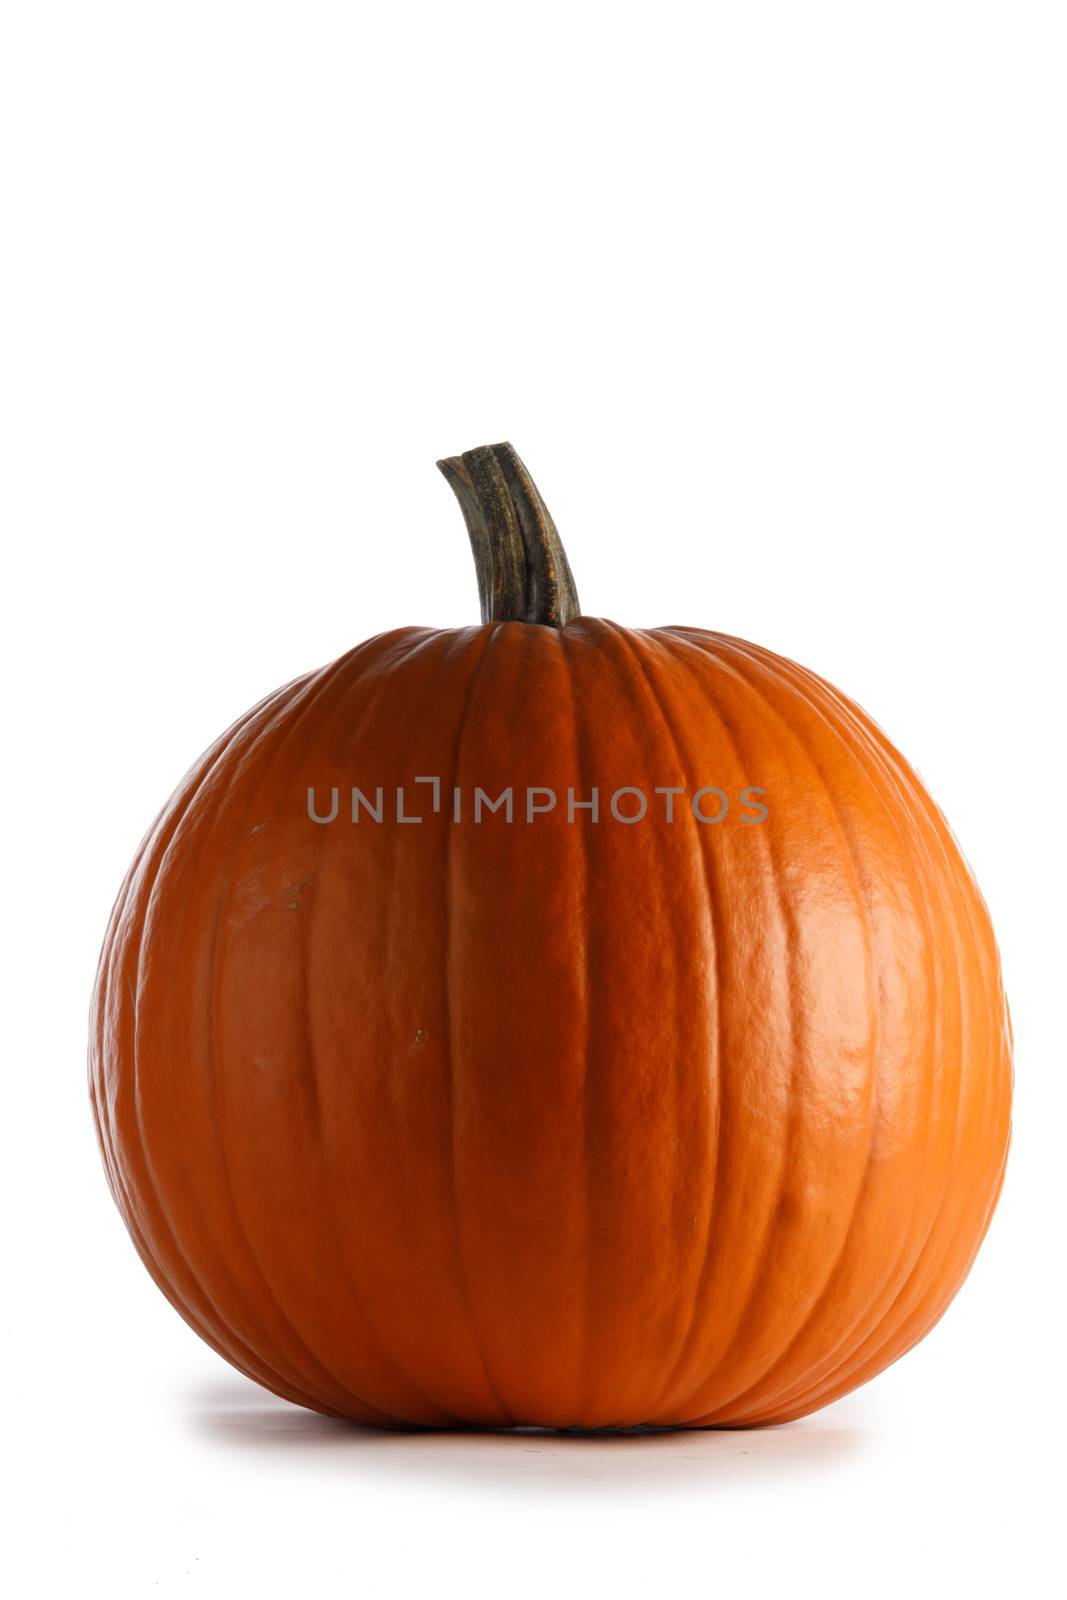 One perfect orange pumpkin closeup isolated on white background